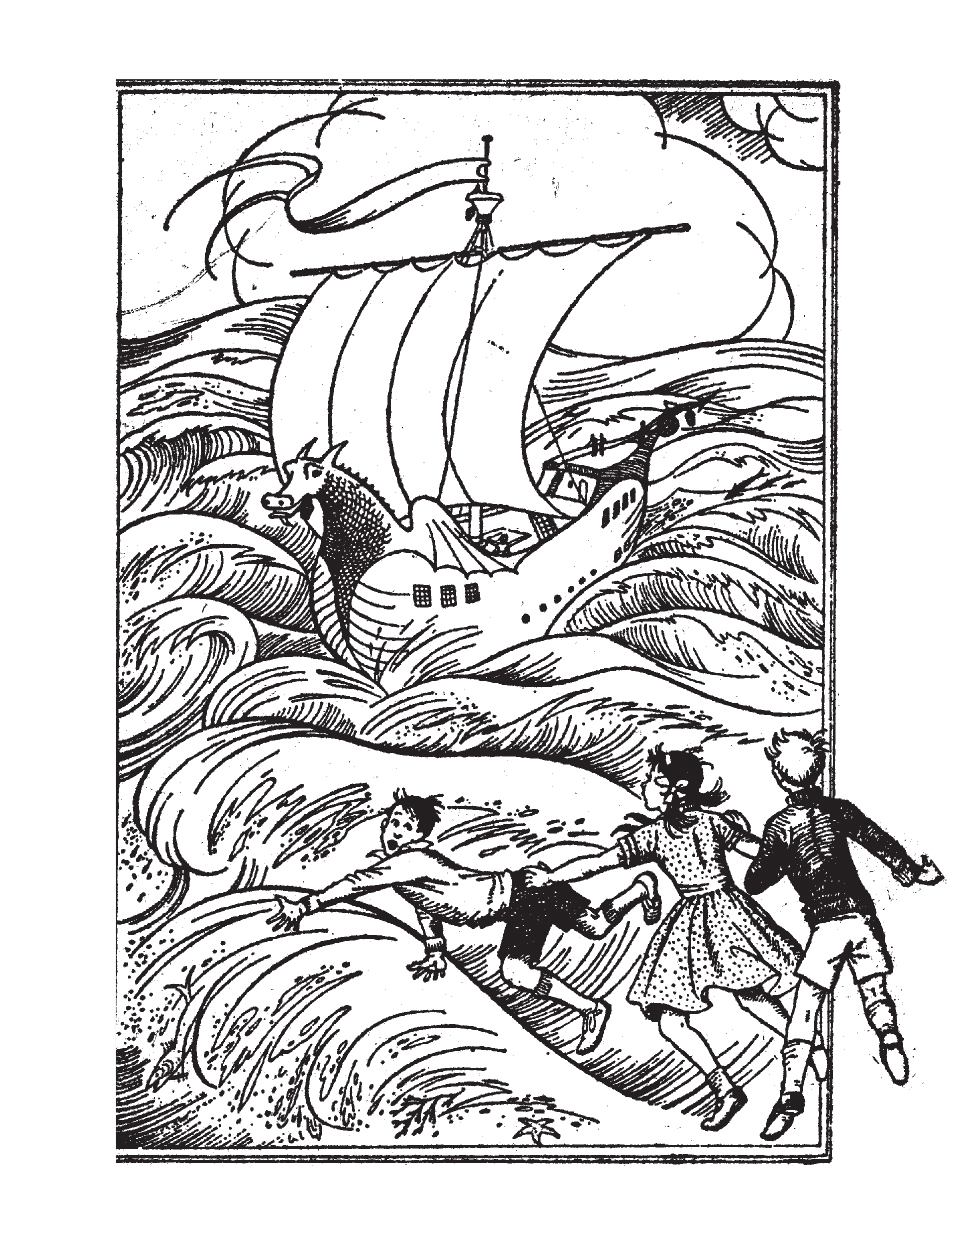 The Voyage of the Dawn Treader - Sarah Crowden, C. S. Lewis - Slightly Foxed Issue 12